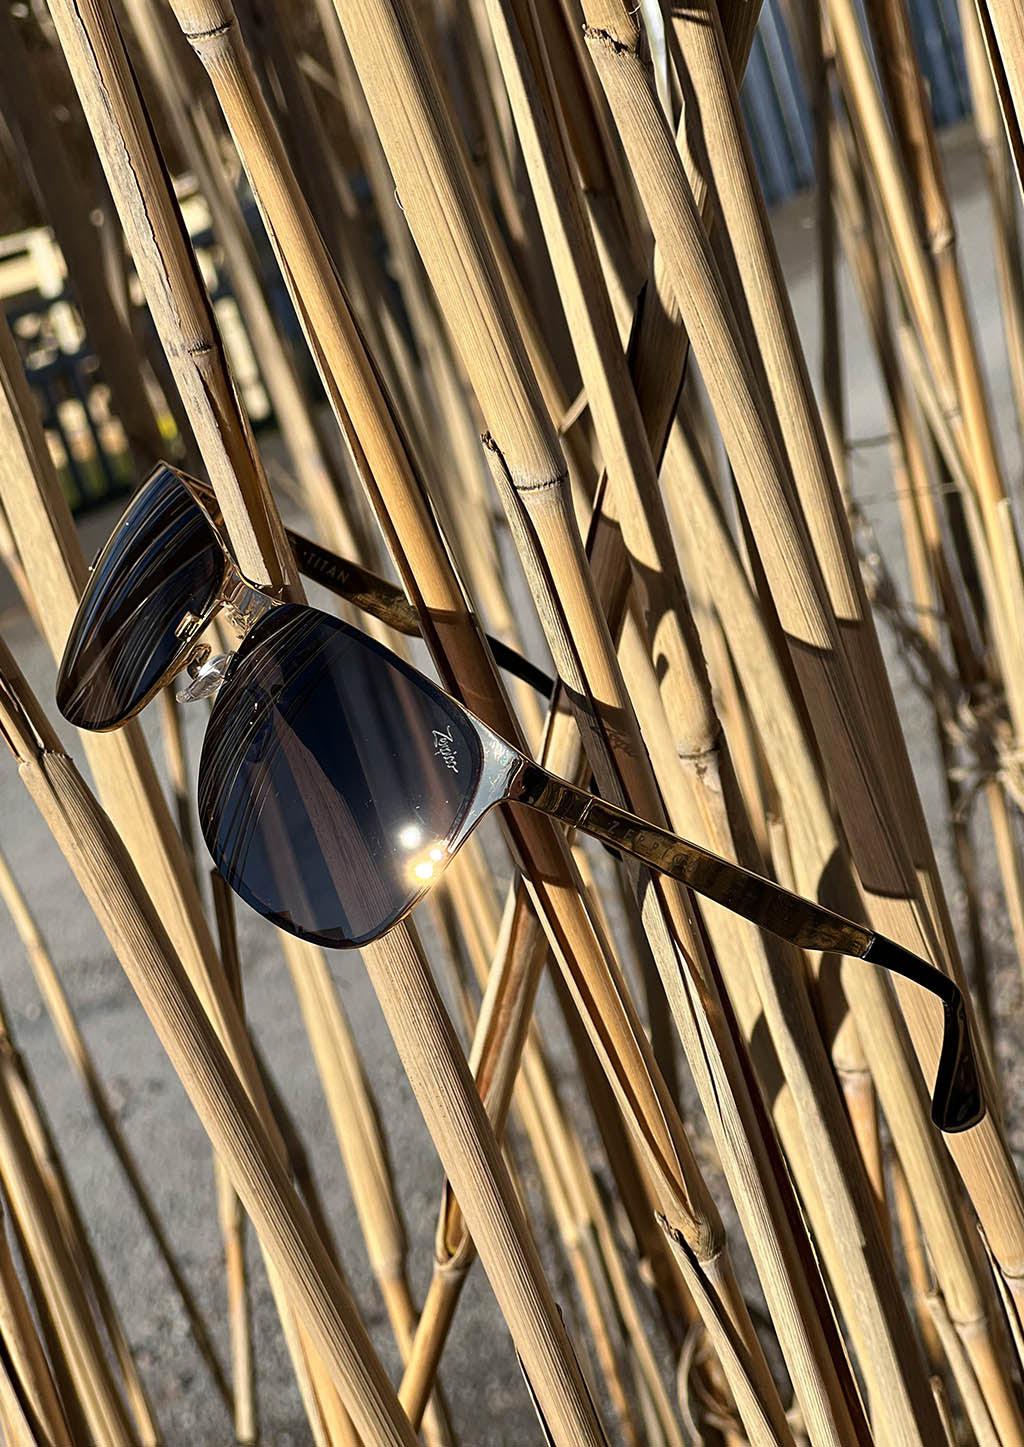 Titan - Titanium Wayfarer Sunglasses V2 - 24K Gold Plated with real gold. Photo taken outside with bamboo.